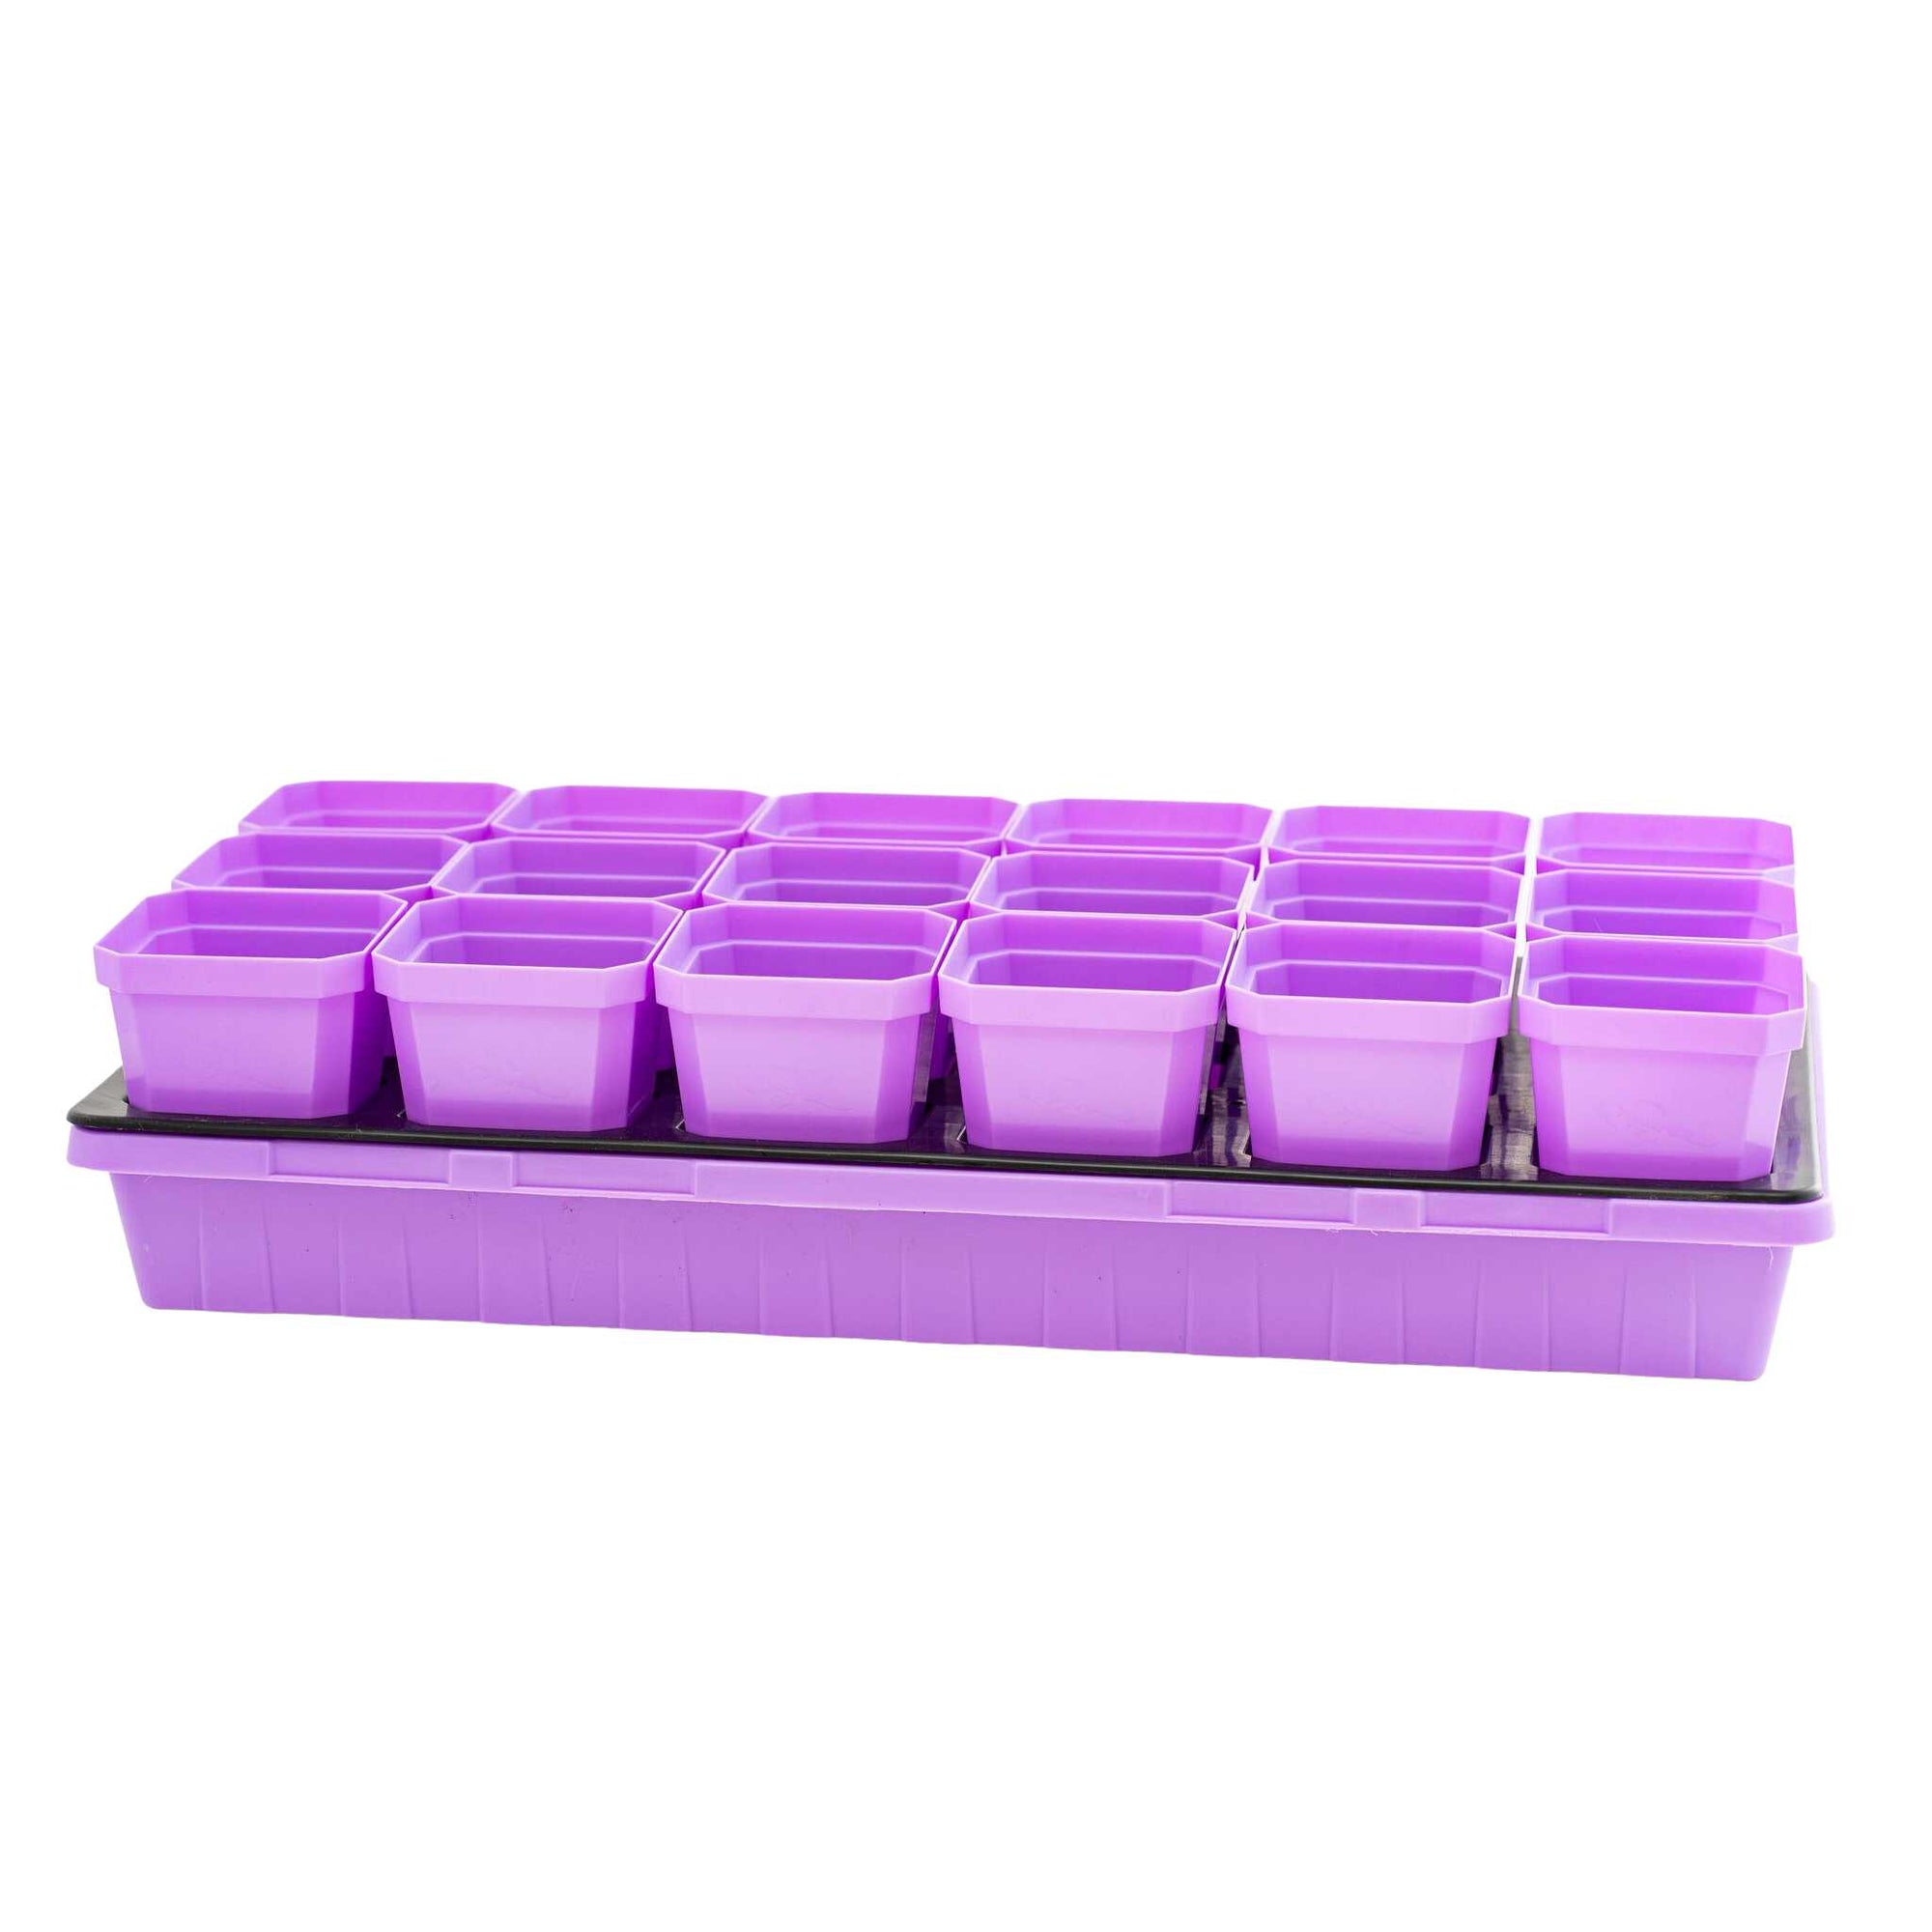 3.3" Seed Starting Pot Nested in a Purple 1020 tray with Insert